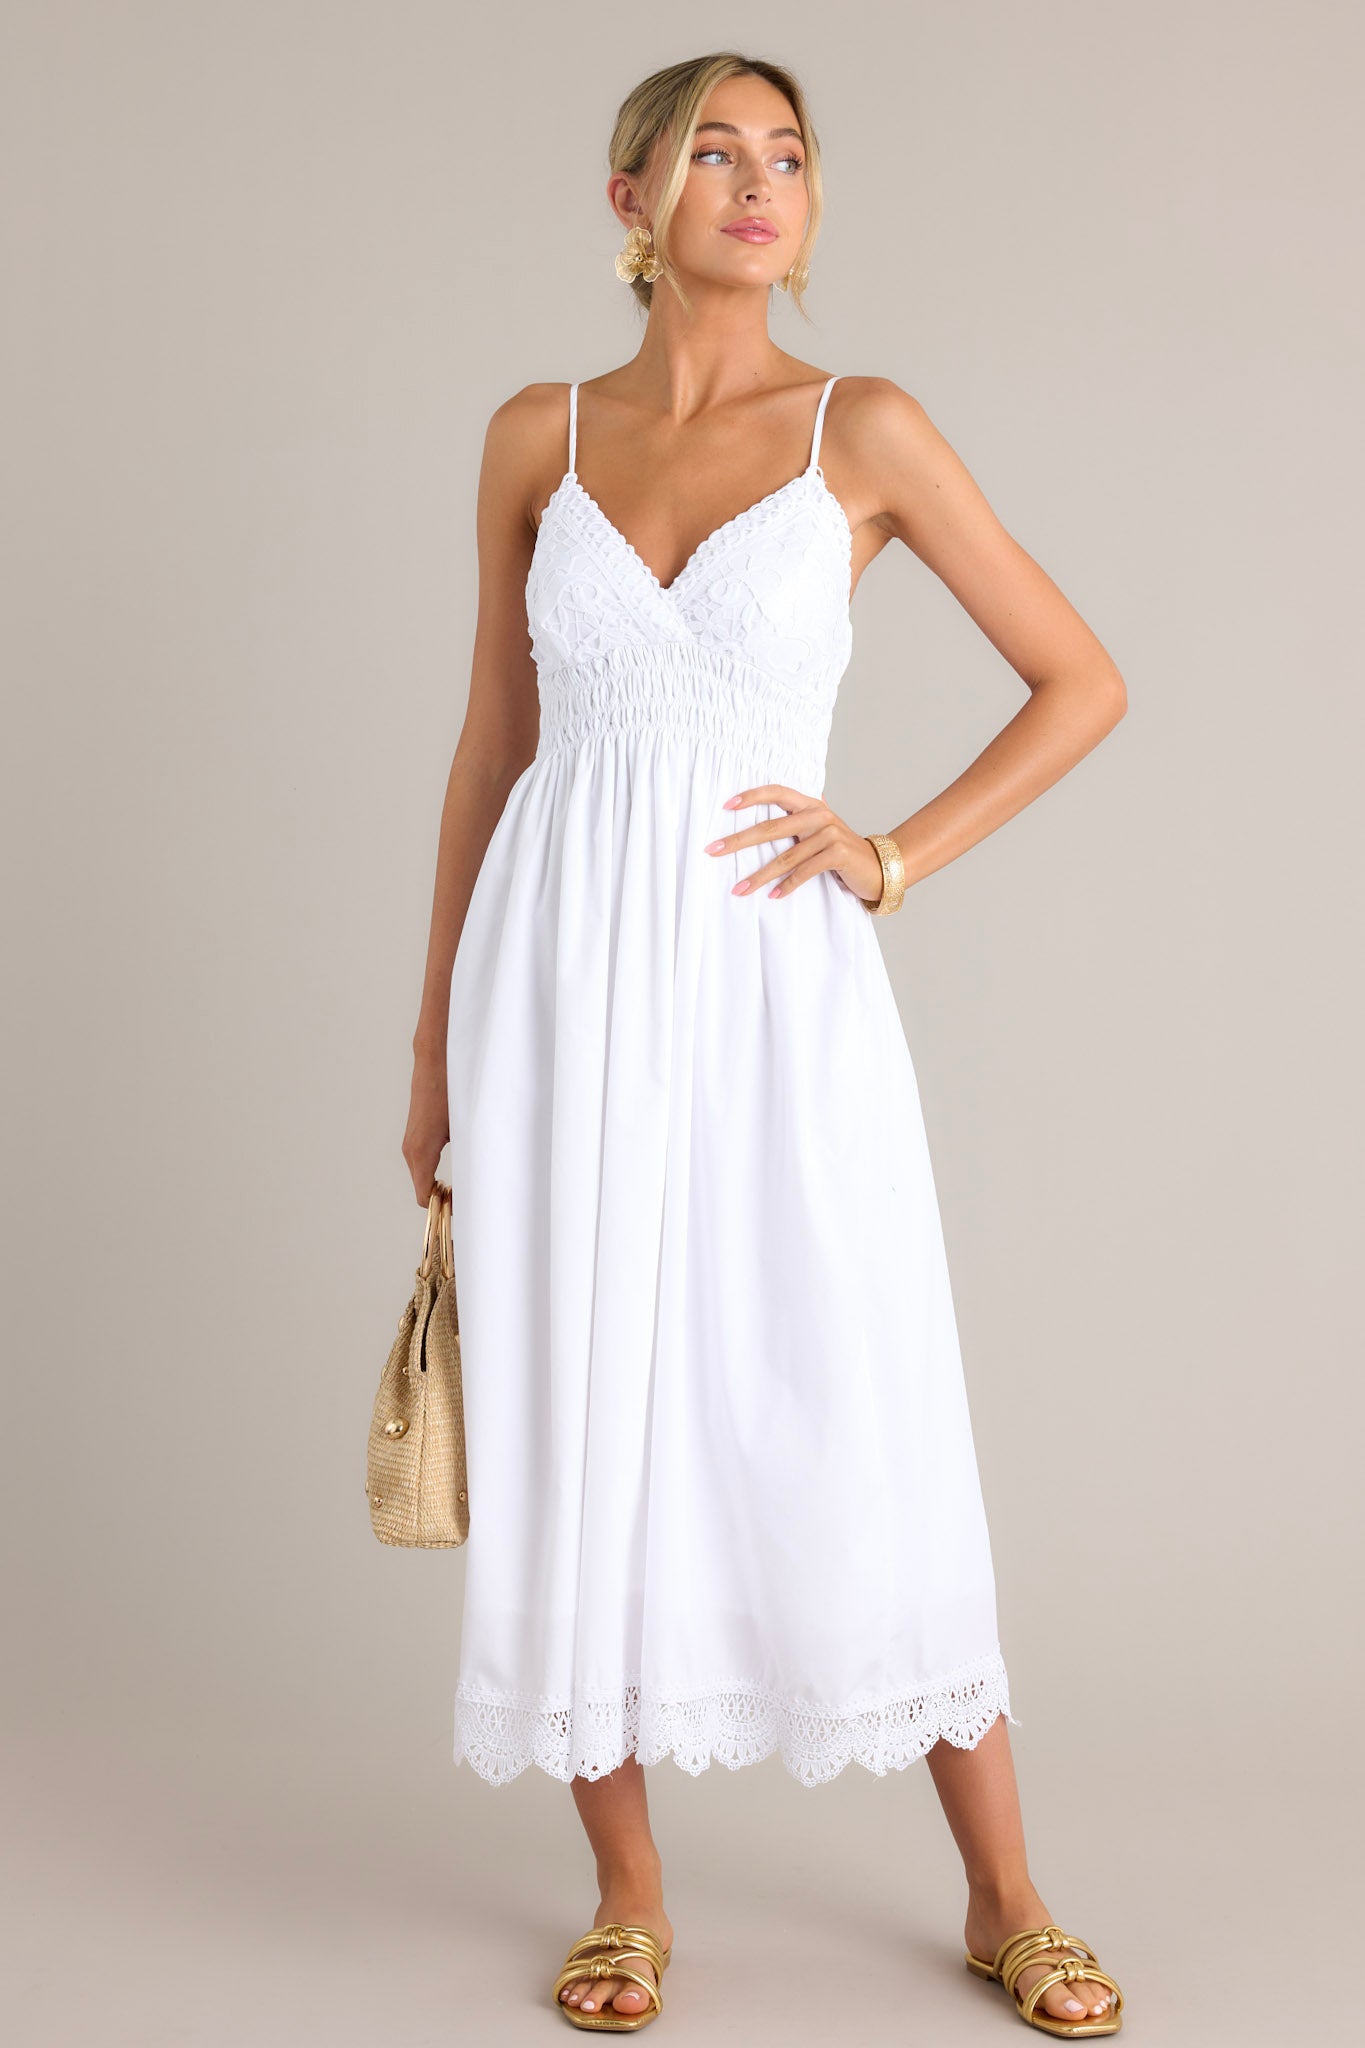 This white maxi dress features a v-neckline, thin adjustable straps, a lace bust, a fully smocked waist back, a flowing silhouette, and a lace hemline.